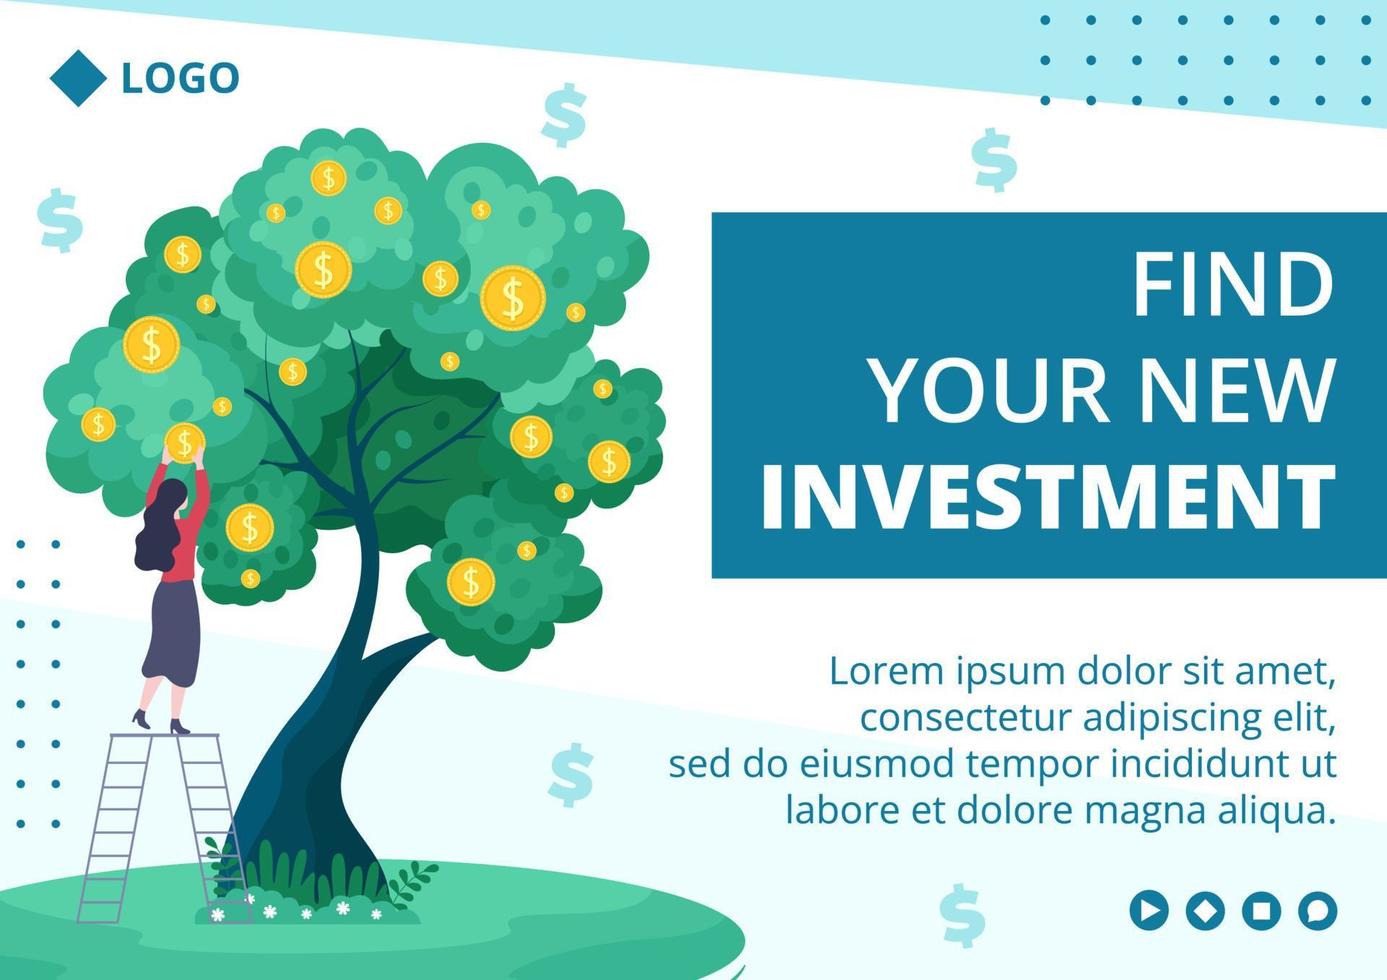 Business Investment Brochure Template Flat Design Illustration Editable of Square Background Suitable for Social media, Greeting Card and Web Internet Ads vector